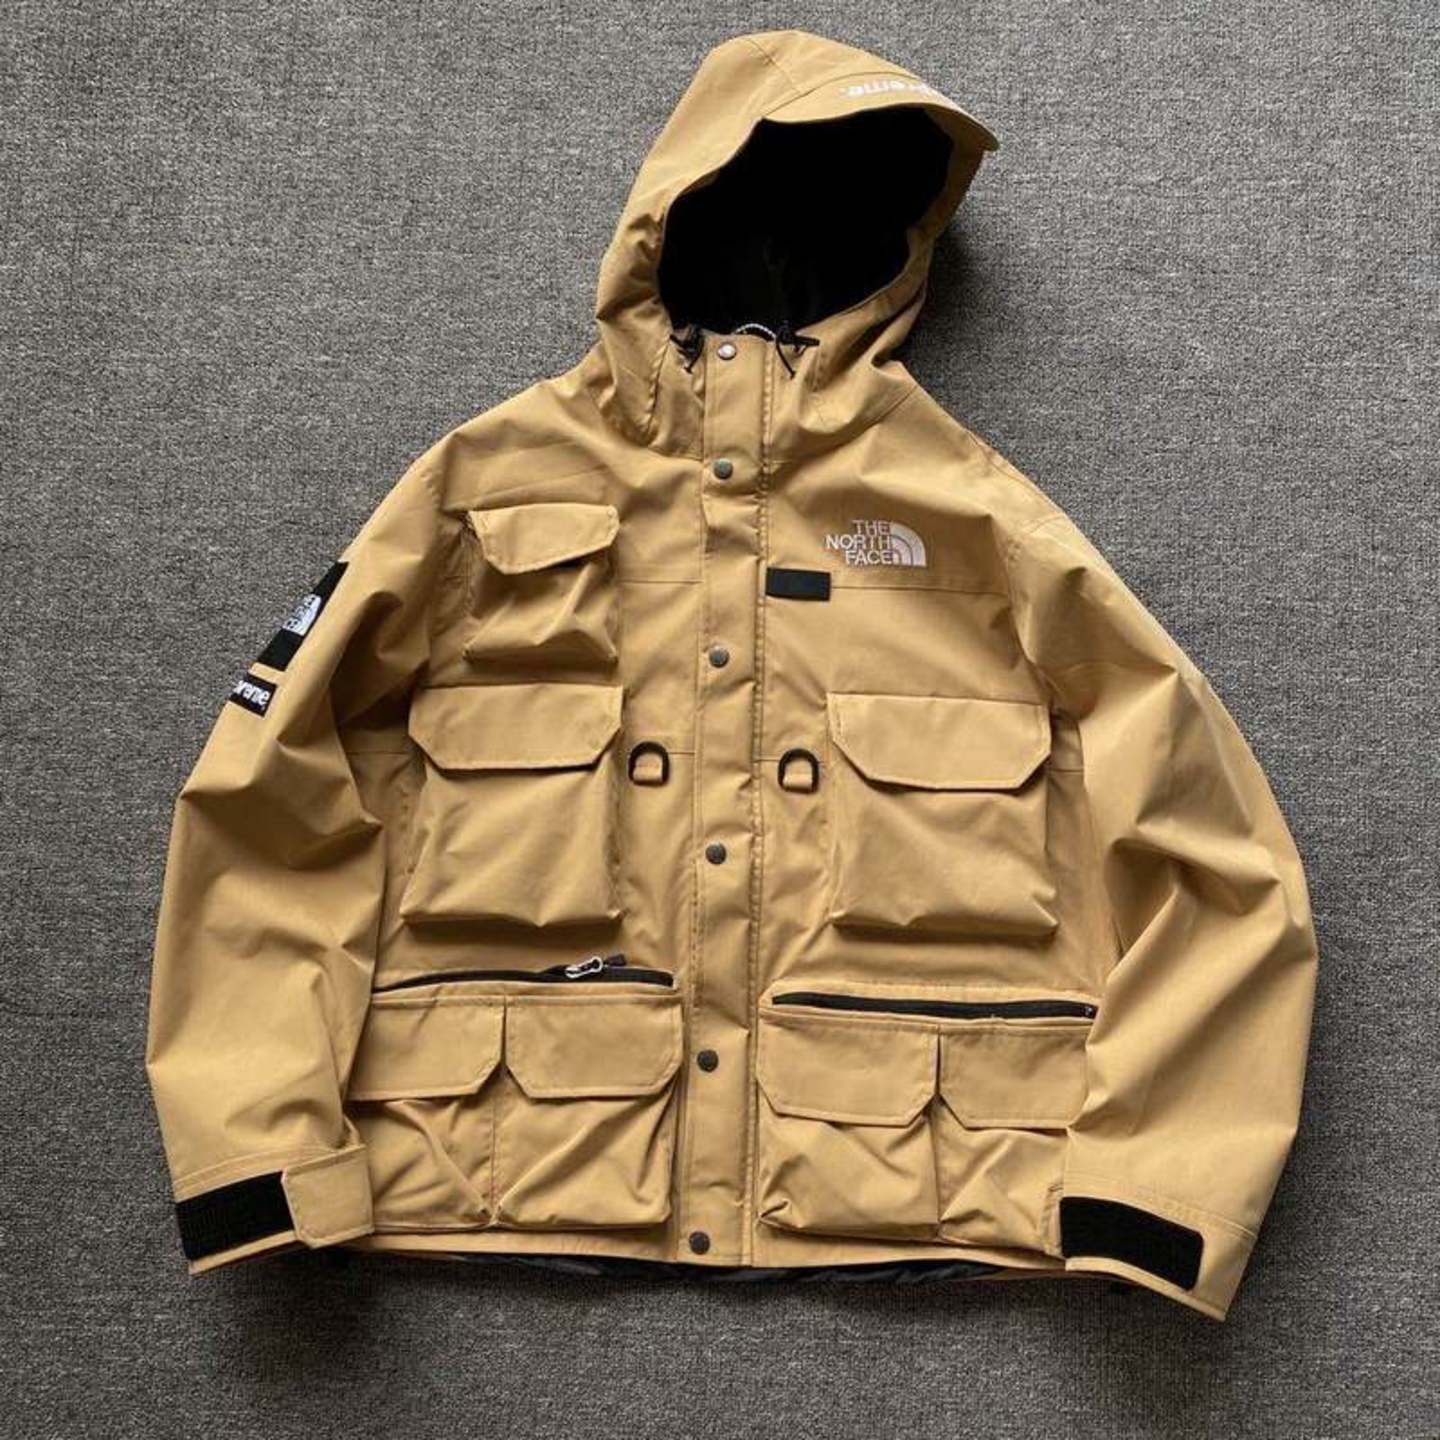 Supreme x The North Face Cargo Jacket